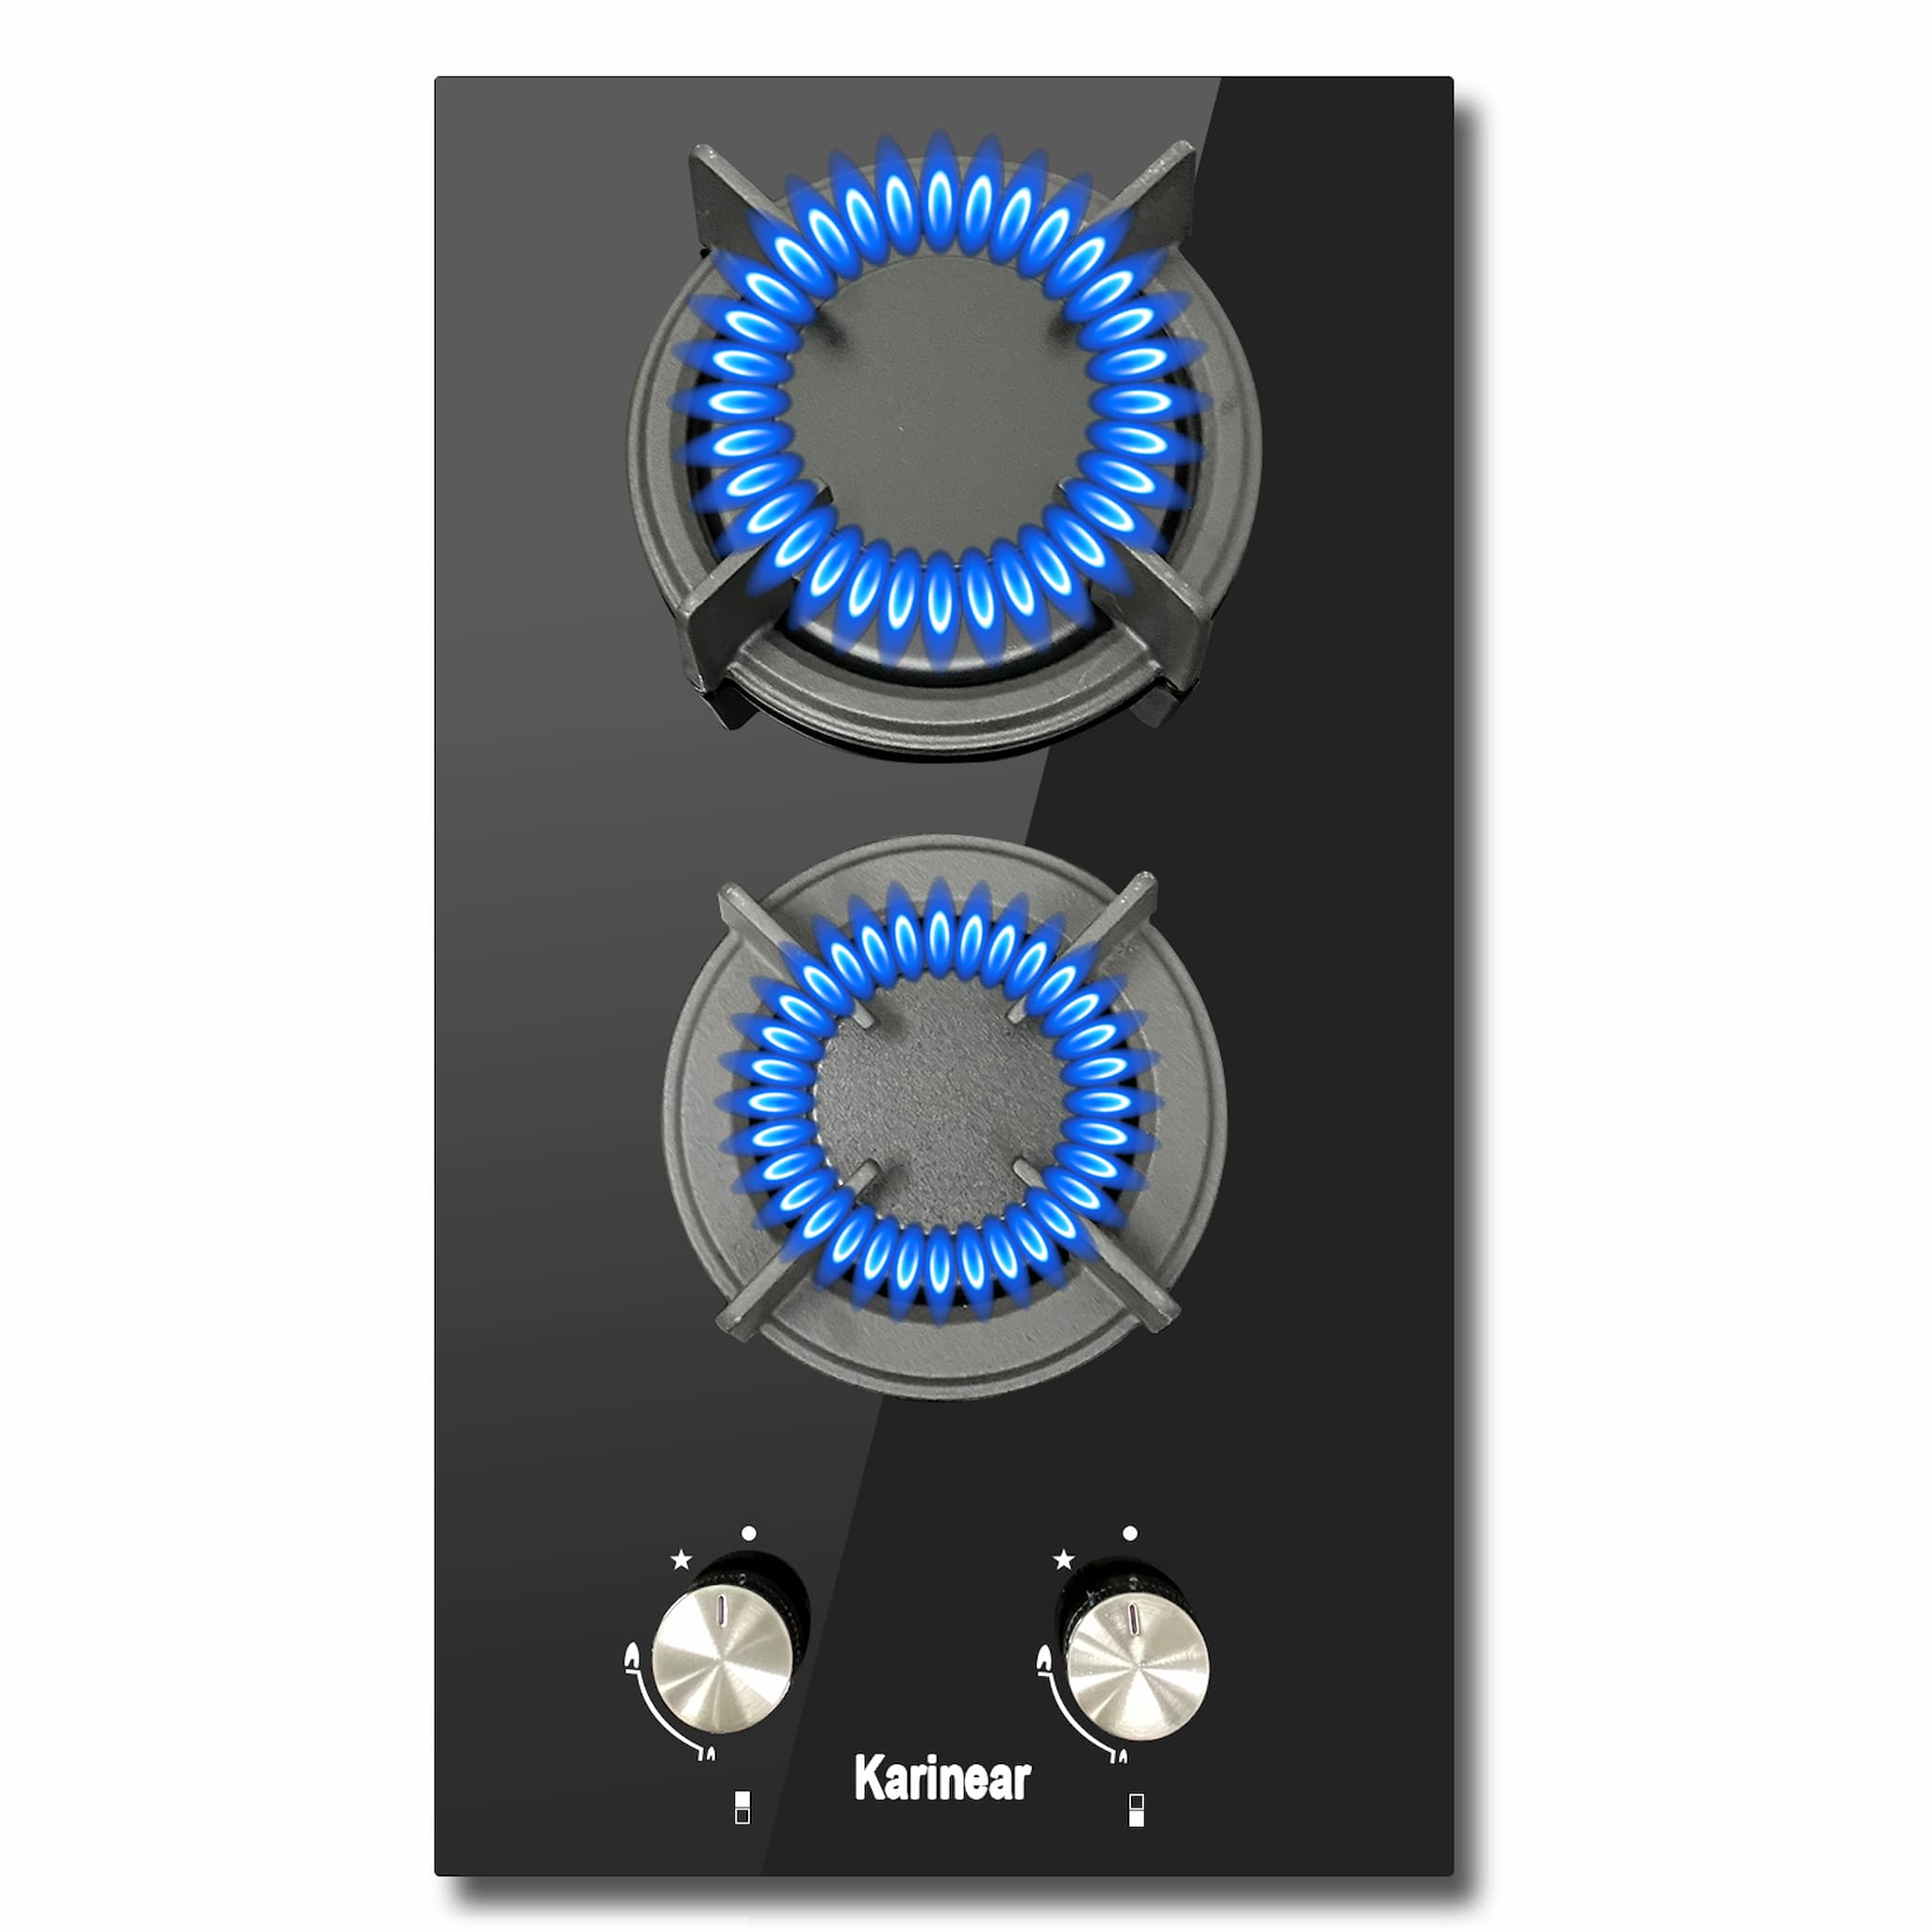 Karinear Tempered Glass 12'' Gas Cooktop 2 Burners, Propane Cooktop, Natural Gas Burner, Built-in Gas Stovetop with Thermocouple Protection for Apartment, Indoor, 110V (Come with Pressure Regulator)